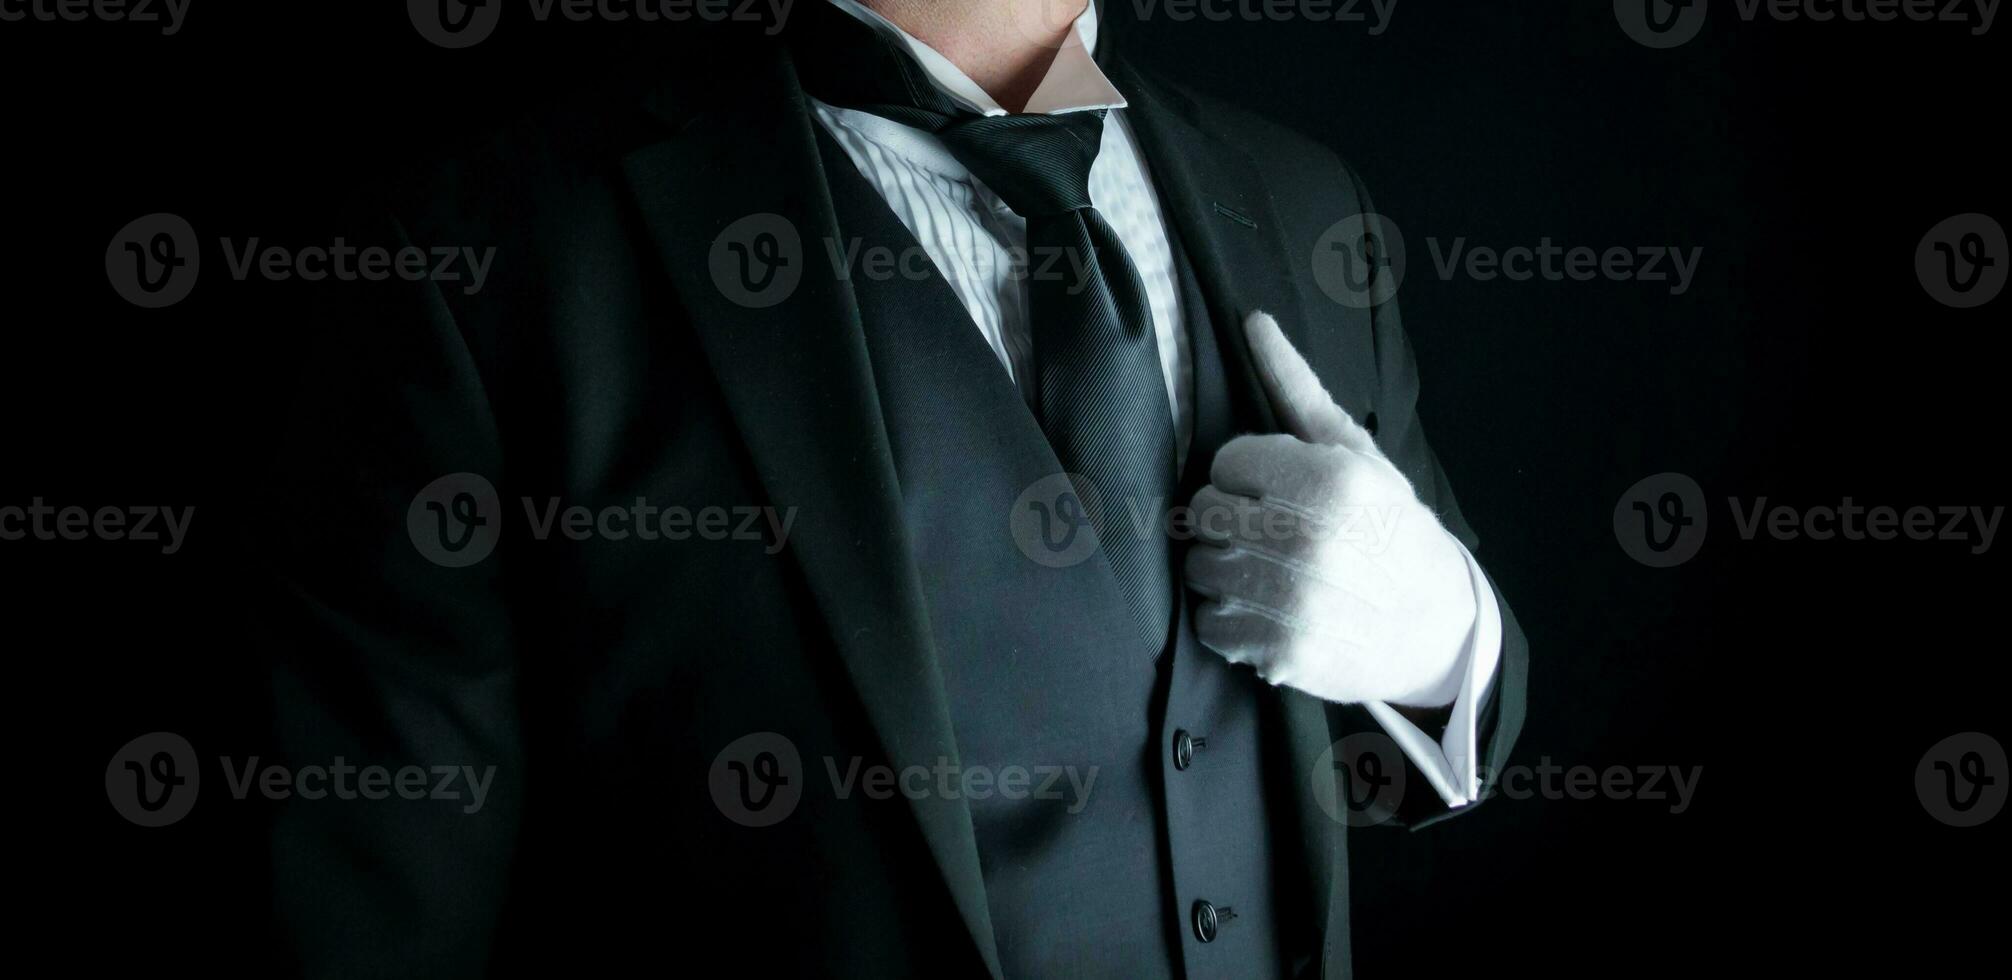 Isolated Close-Up of Butler in Dark Suit and White Gloves Standing at Dignified Attention. Service Industry and Professional Hospitality. photo